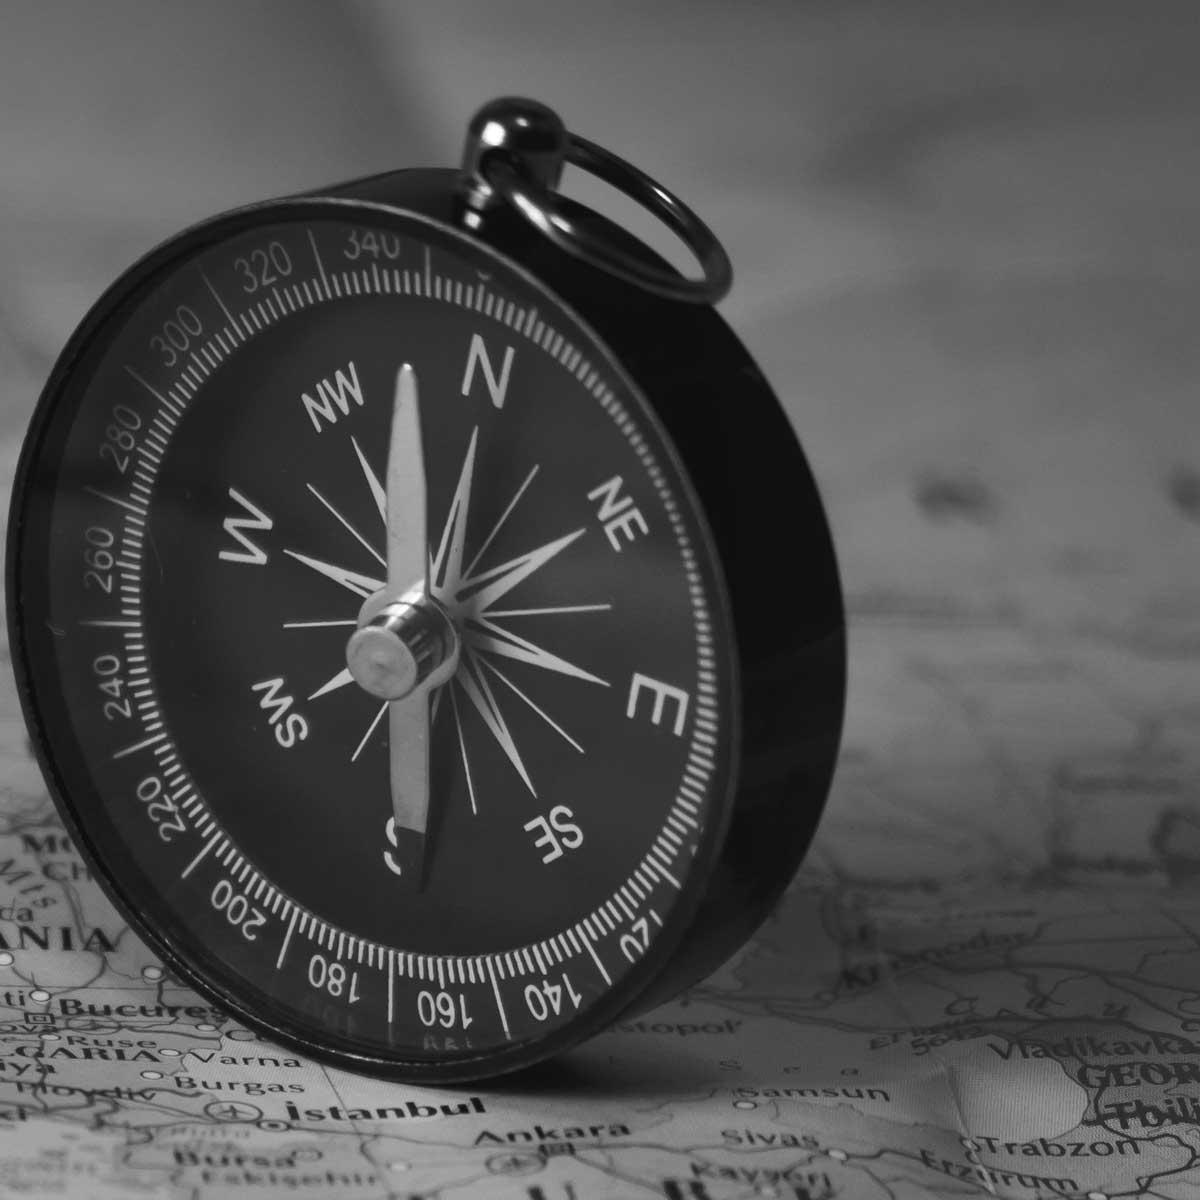 compass on a black and white tourist map. Focus on the compass needle